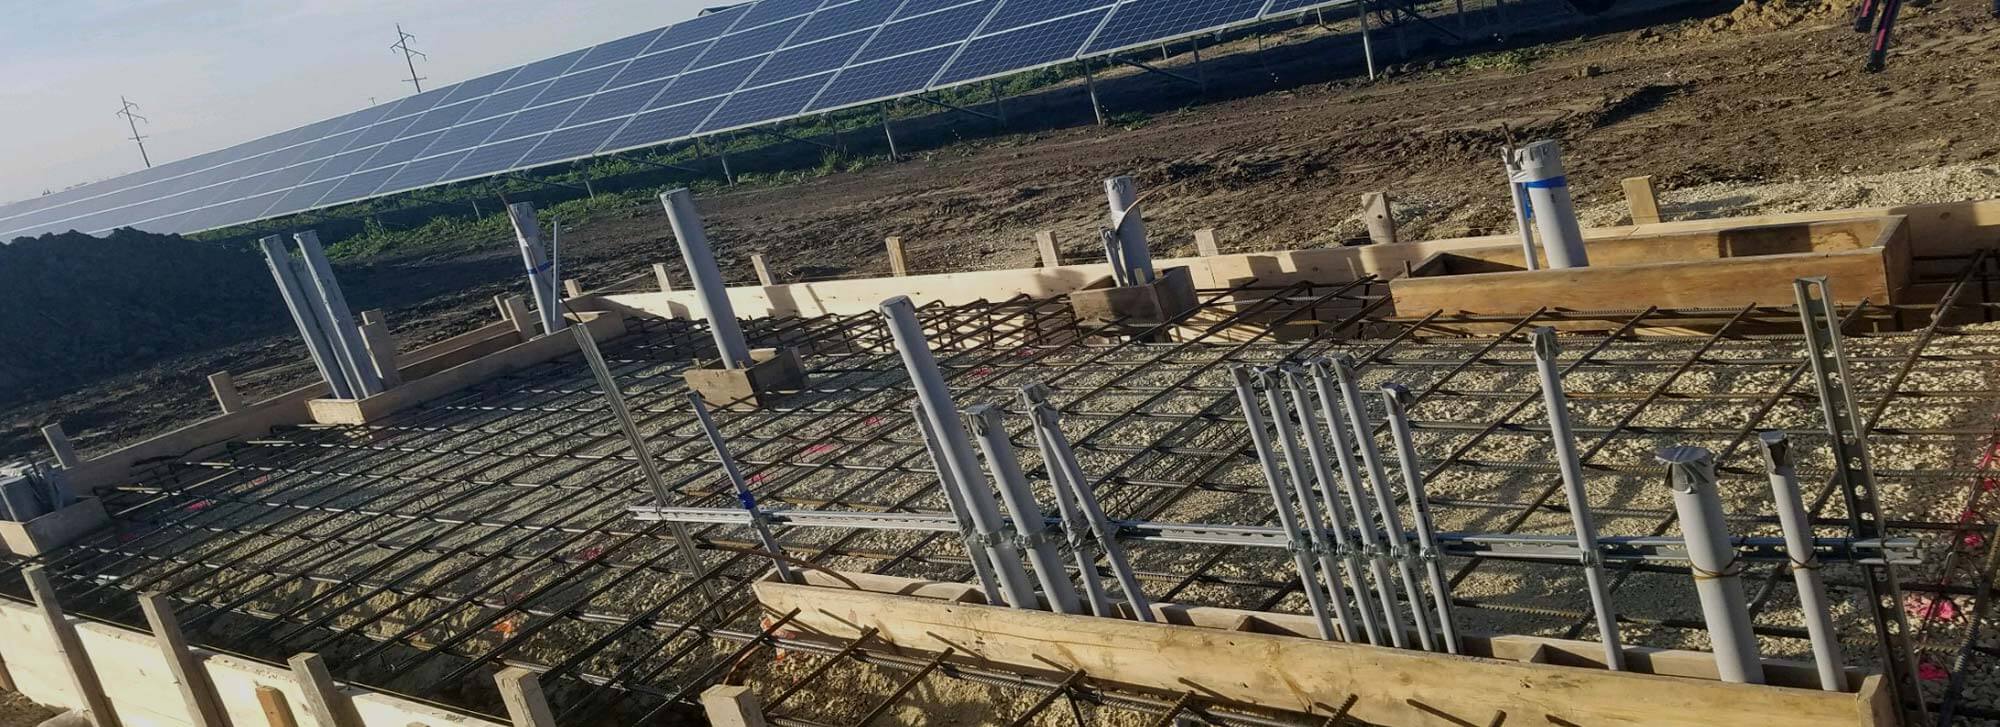 Concrete platform frames for a solar panel farm prepped and ready for concrete to be poured by Van Haren Construction